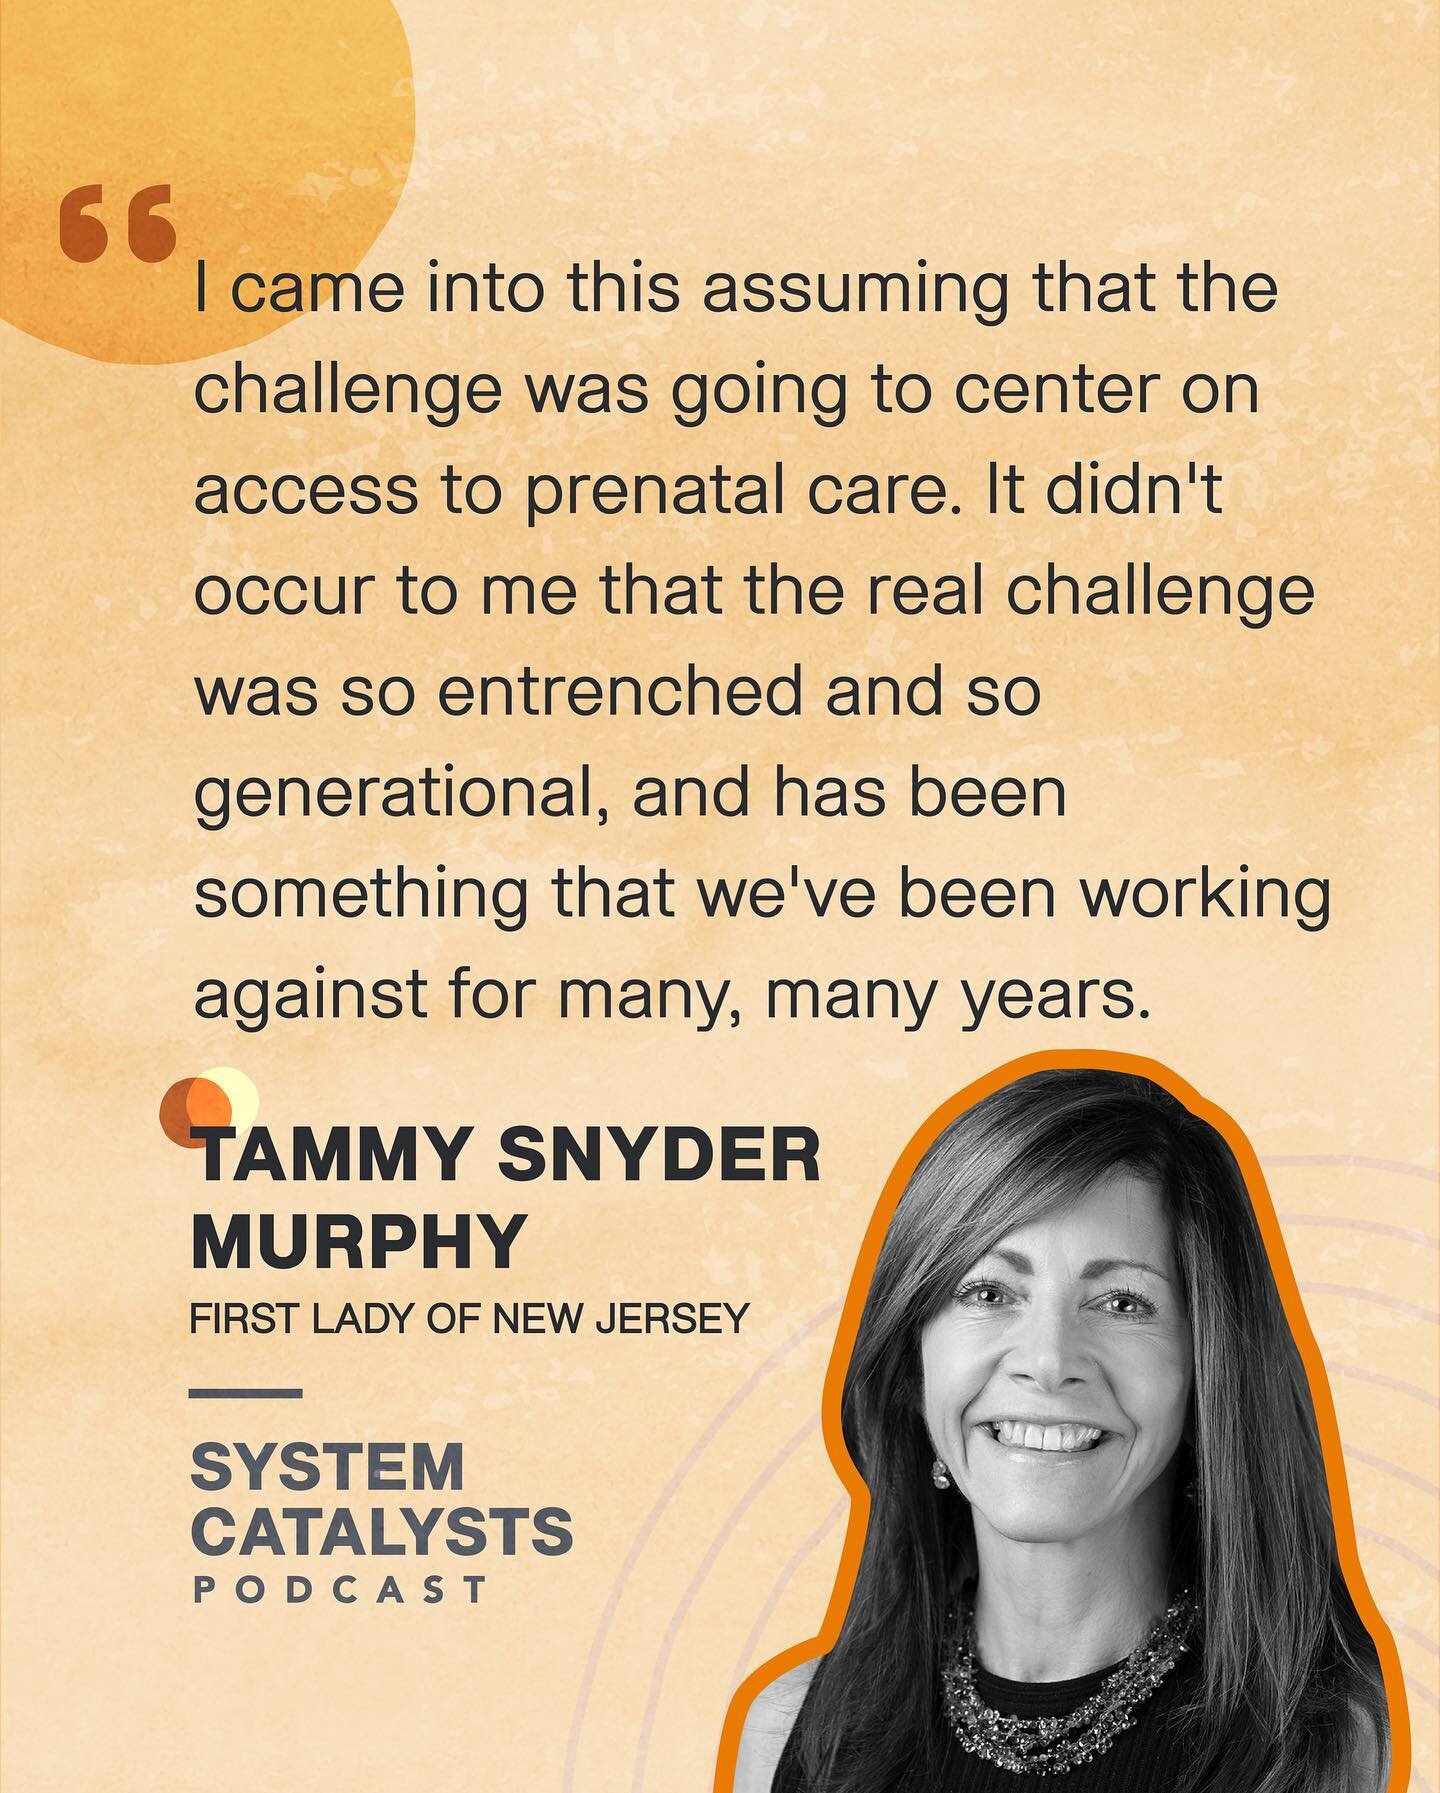 When Tammy Murphy, First Lady of New Jersey, came into office, New Jersey was 45th in the nation for maternal mortality. Today, it is down to 36th and is one of only four U.S. states that improved preterm birth rates&mdash;a key indicator of maternit